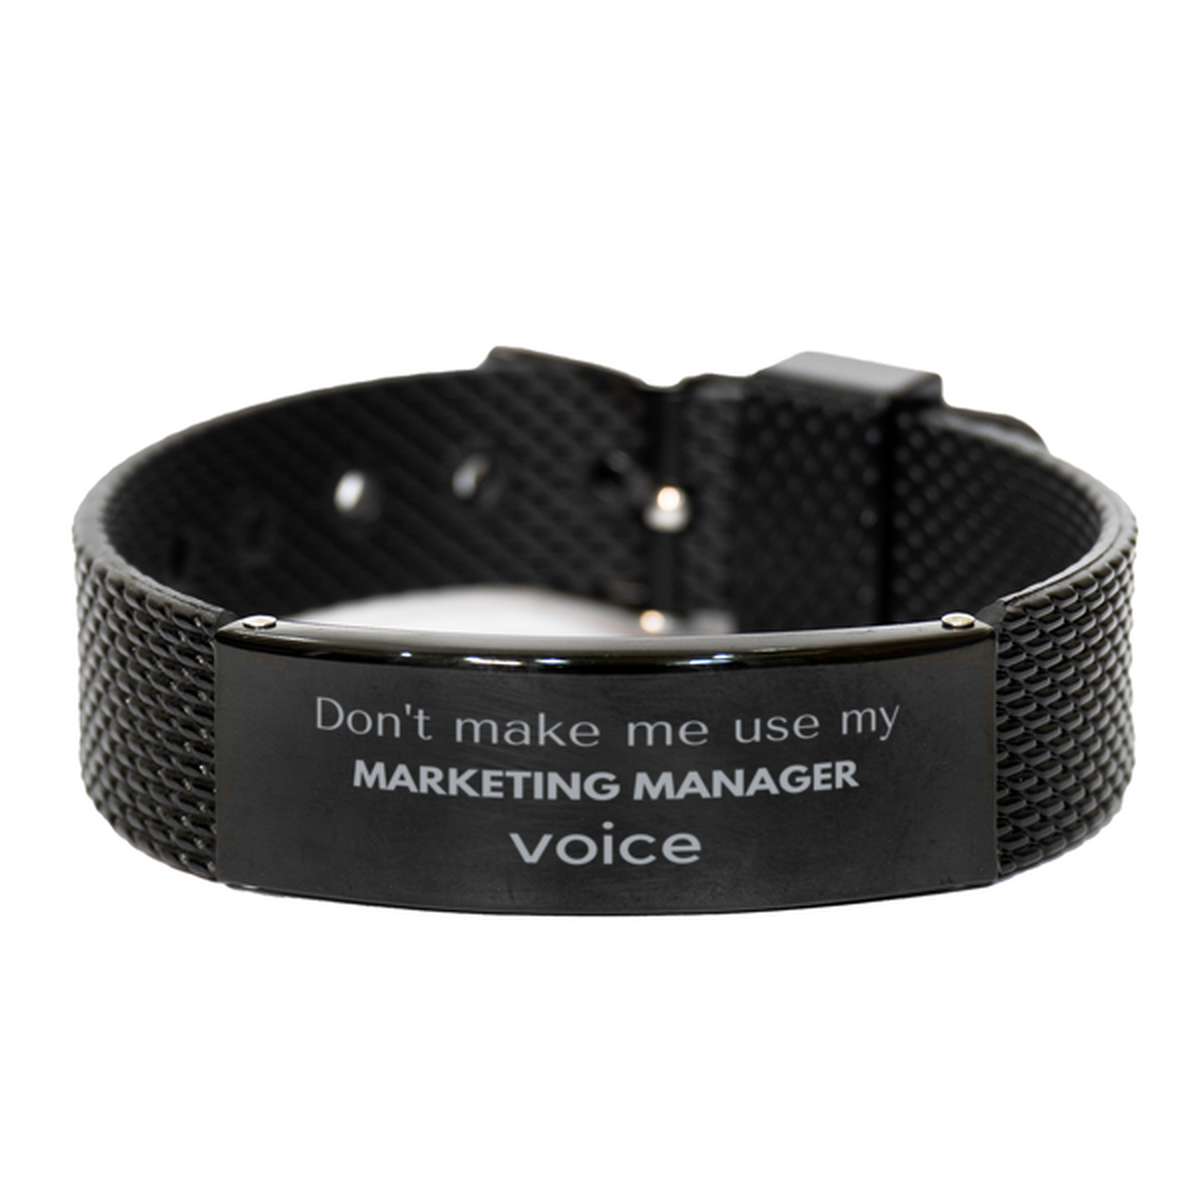 Don't make me use my Marketing Manager voice, Sarcasm Marketing Manager Gifts, Christmas Marketing Manager Black Shark Mesh Bracelet Birthday Unique Gifts For Marketing Manager Coworkers, Men, Women, Colleague, Friends